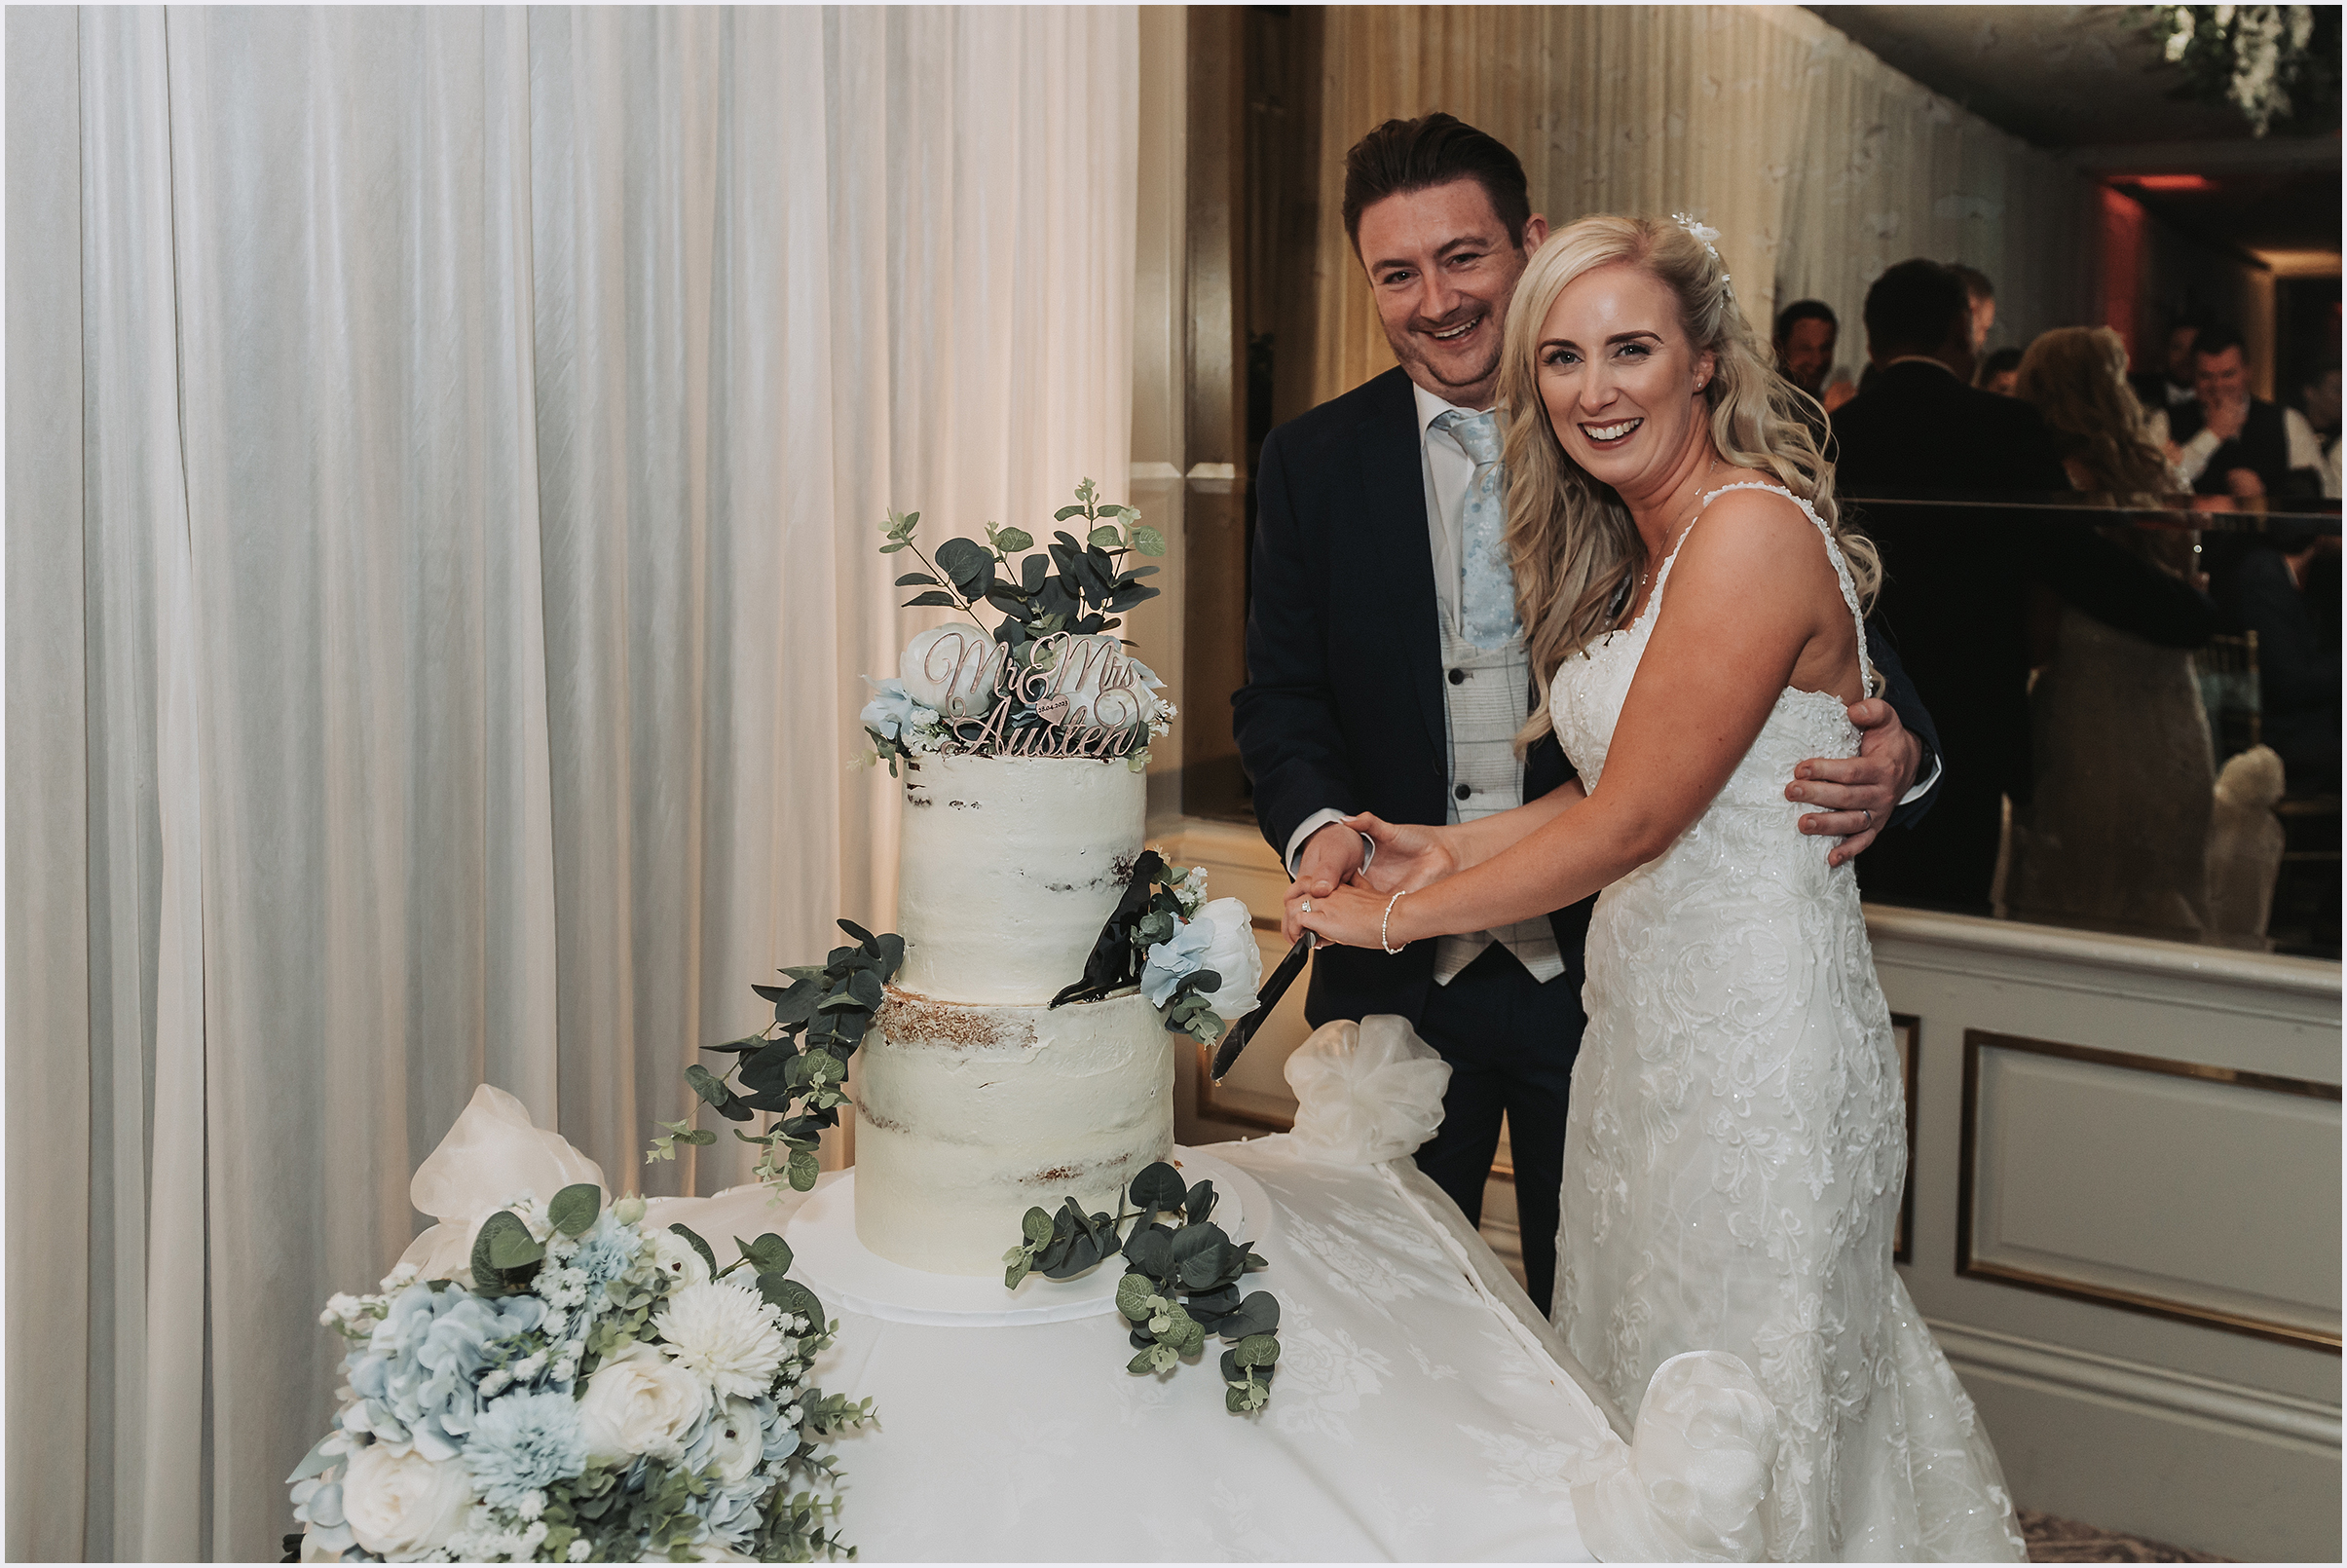 A newly married couple smiling at the camera as they cut their wedding cake during the evening reception at The Grosvenor Pulford Hotel and Spa.